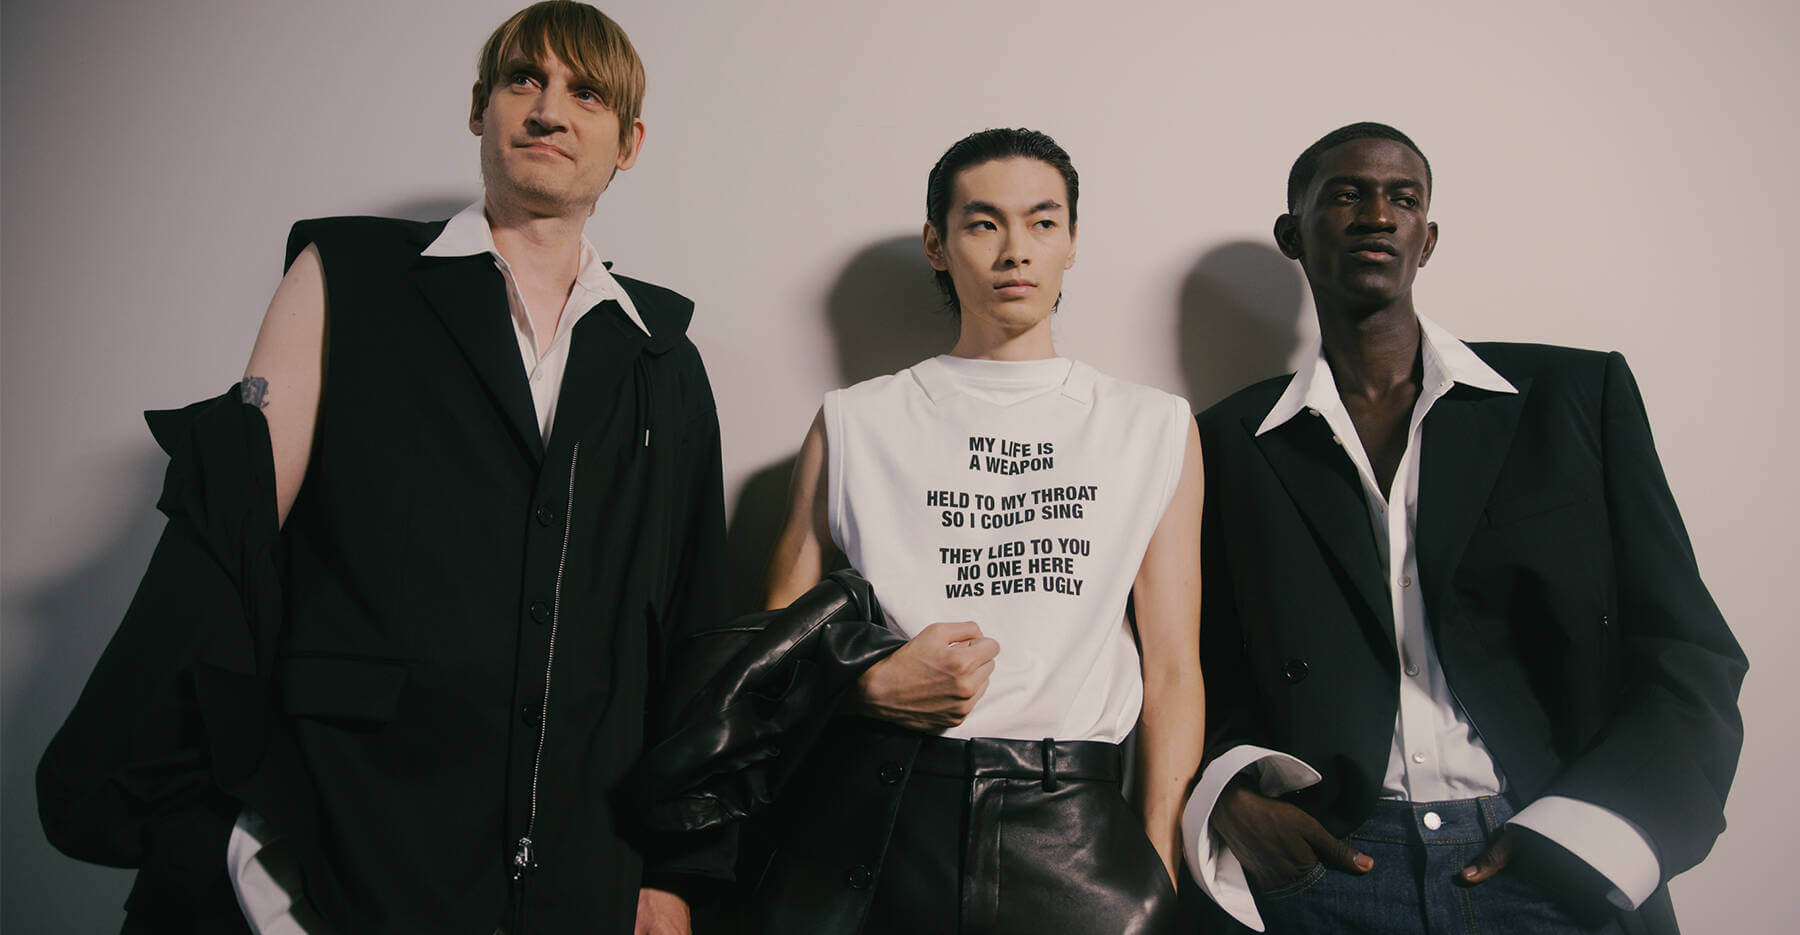 Peter Do's Helmut Lang Debut Brings New York Fashion to the Forefront